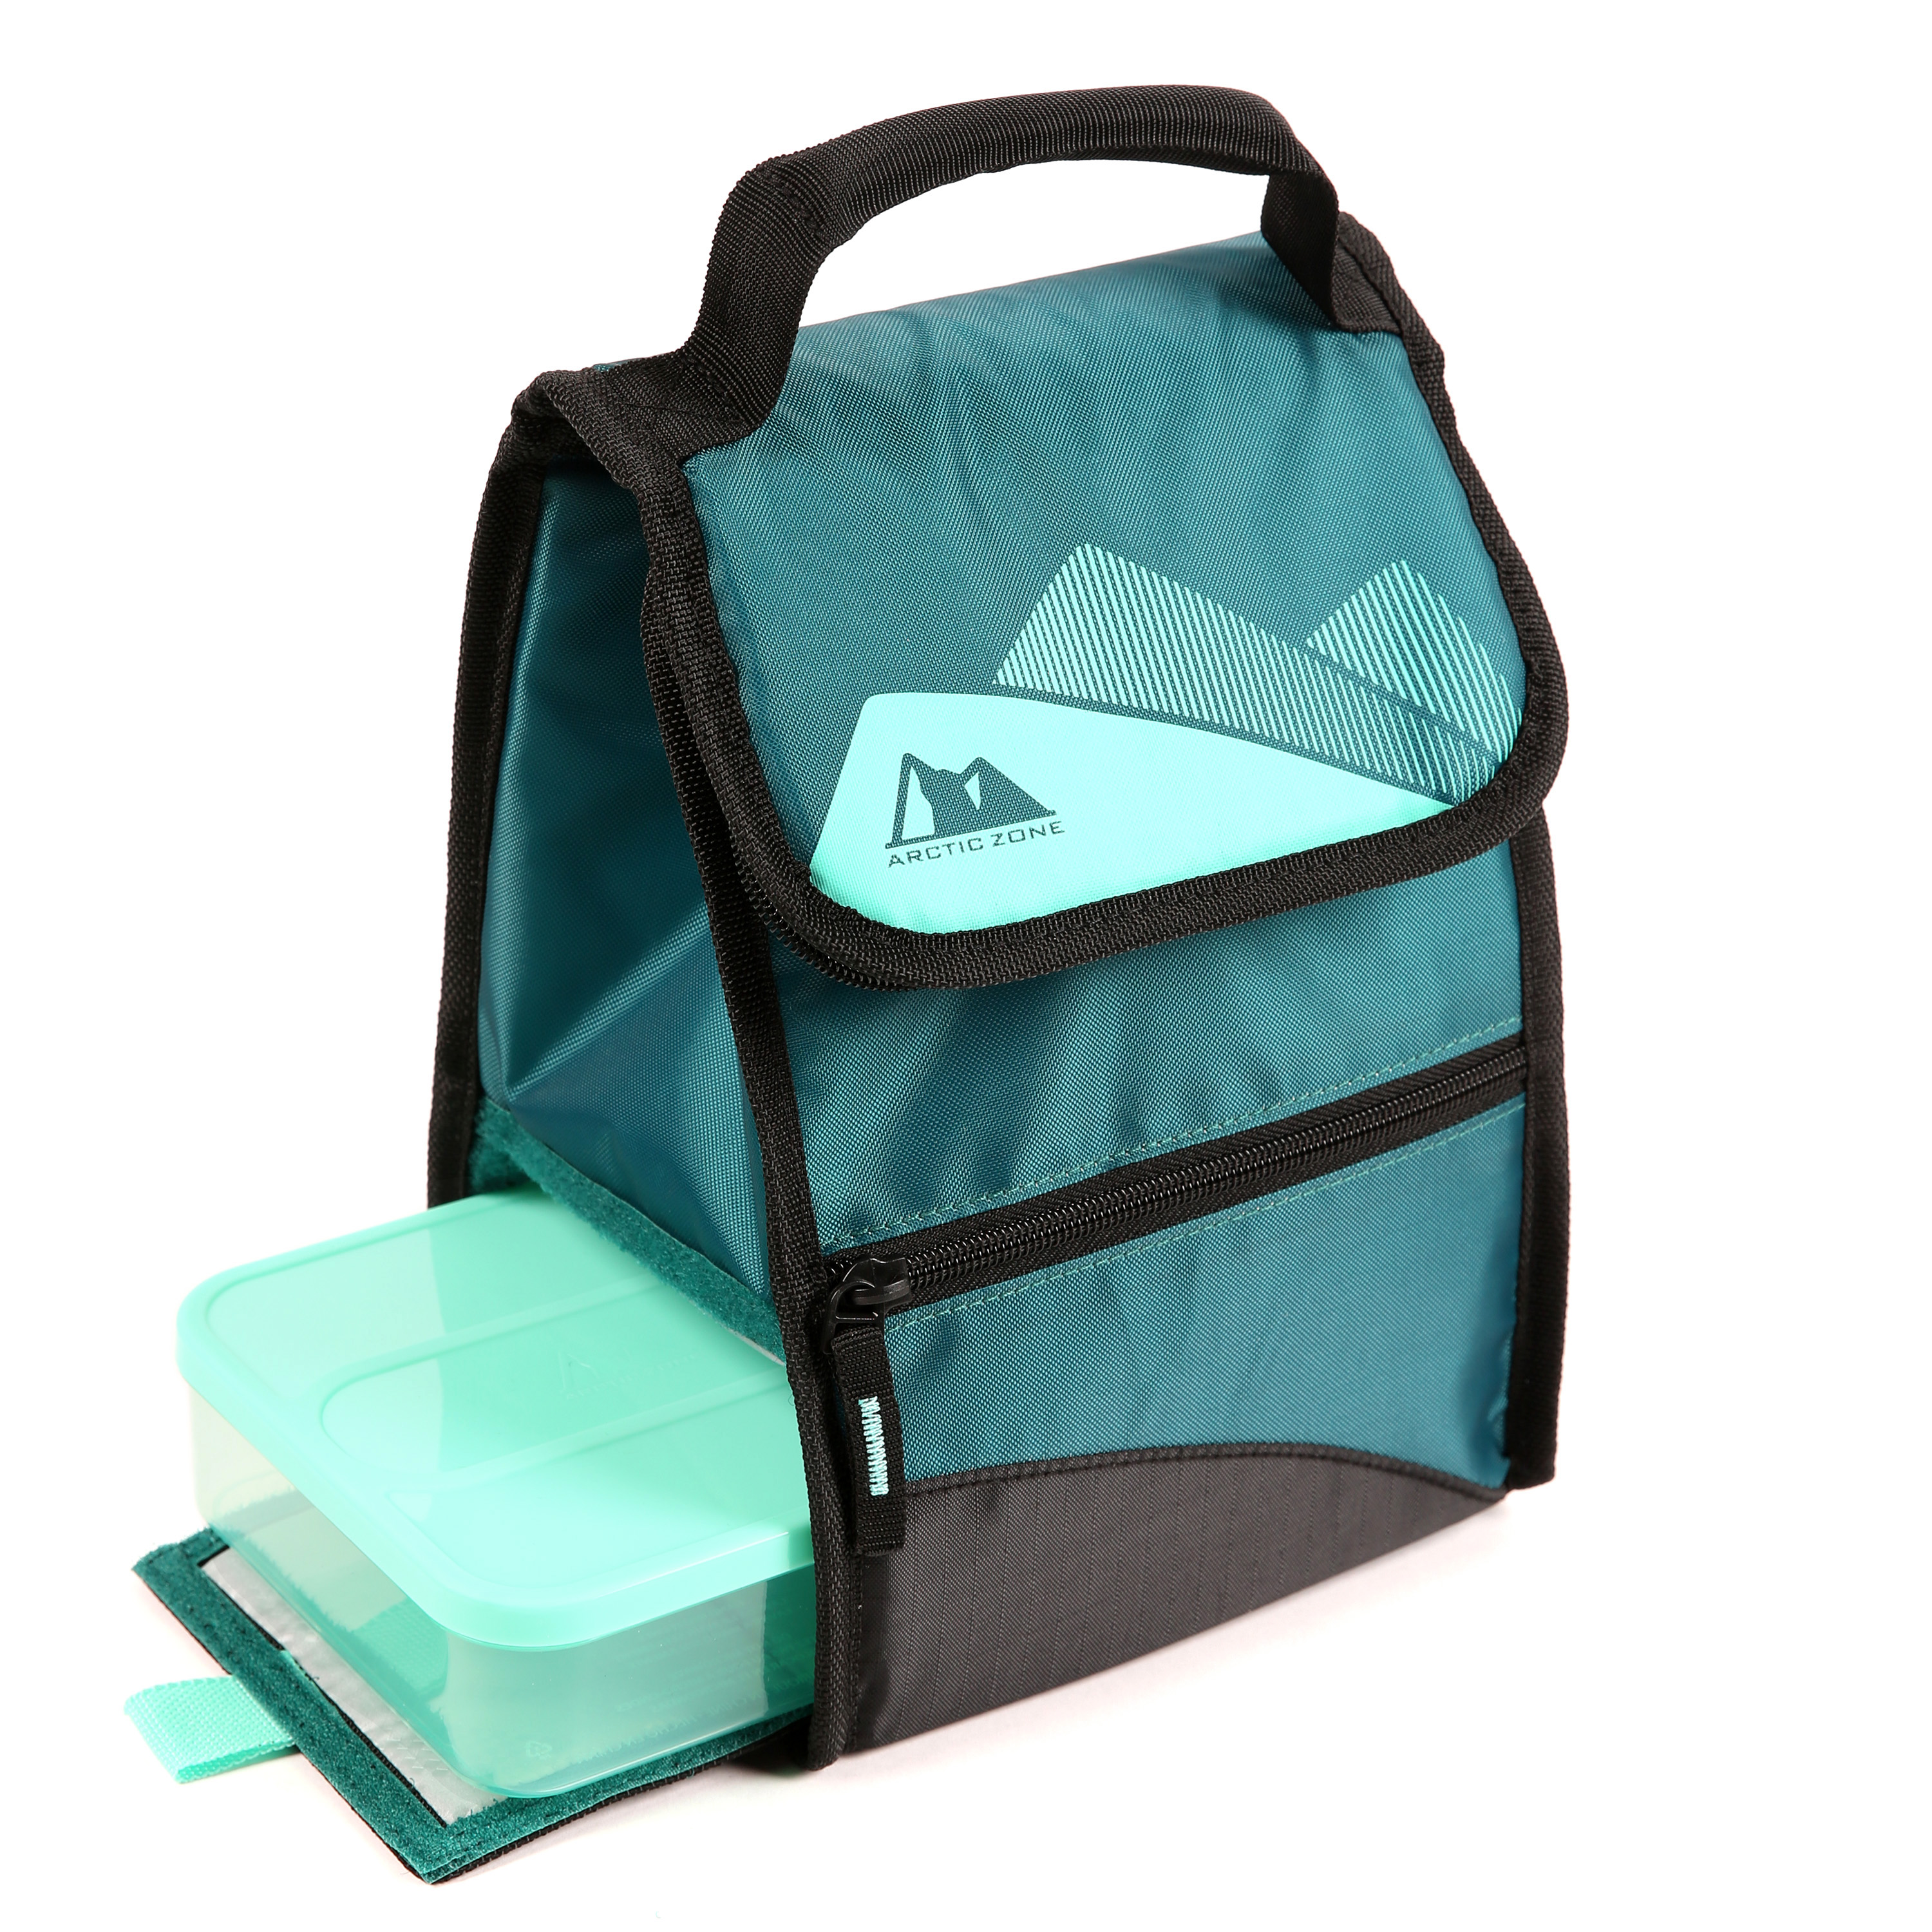 Artic Zone Reuseable Hi-Top Power Pack Polyester Insulated Lunch Bag Emerald/Mint - image 1 of 9